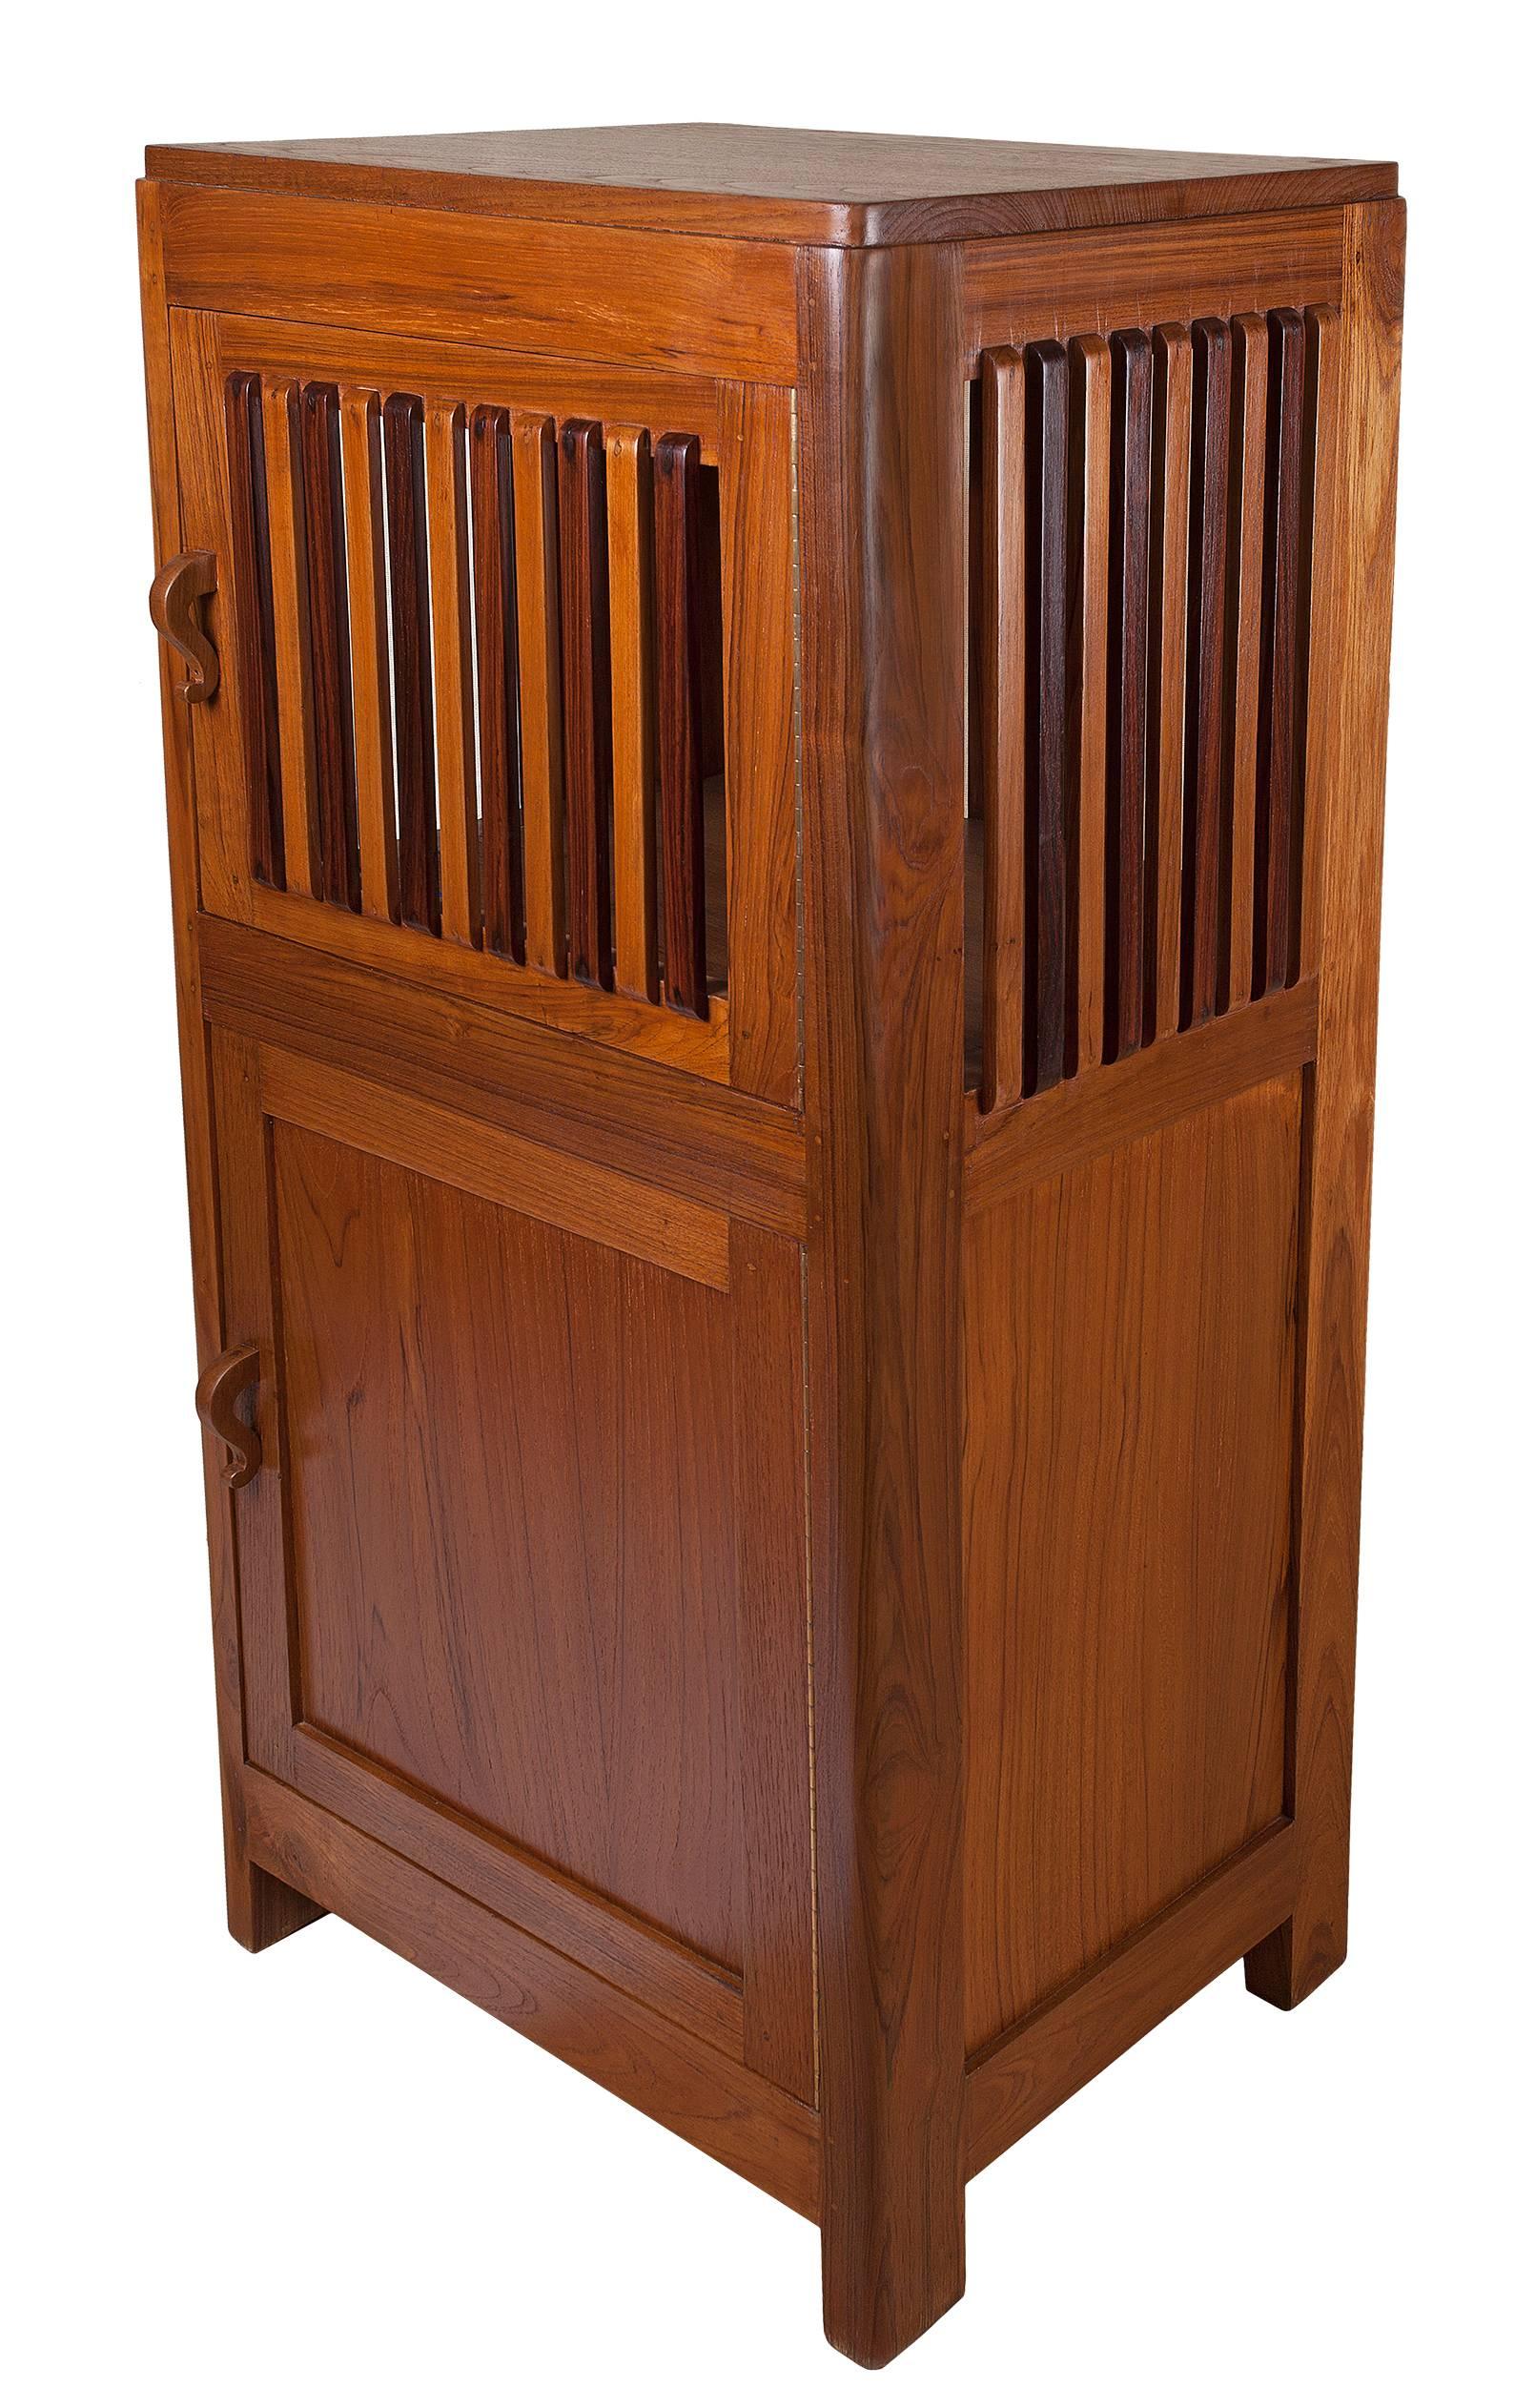 Unusual, Mid-Century teak and rosewood pie safe. Mid-Century, Colonial British. Two compartments, upper and lower....and the upper portion has alternating teak and rosewood slats all around.